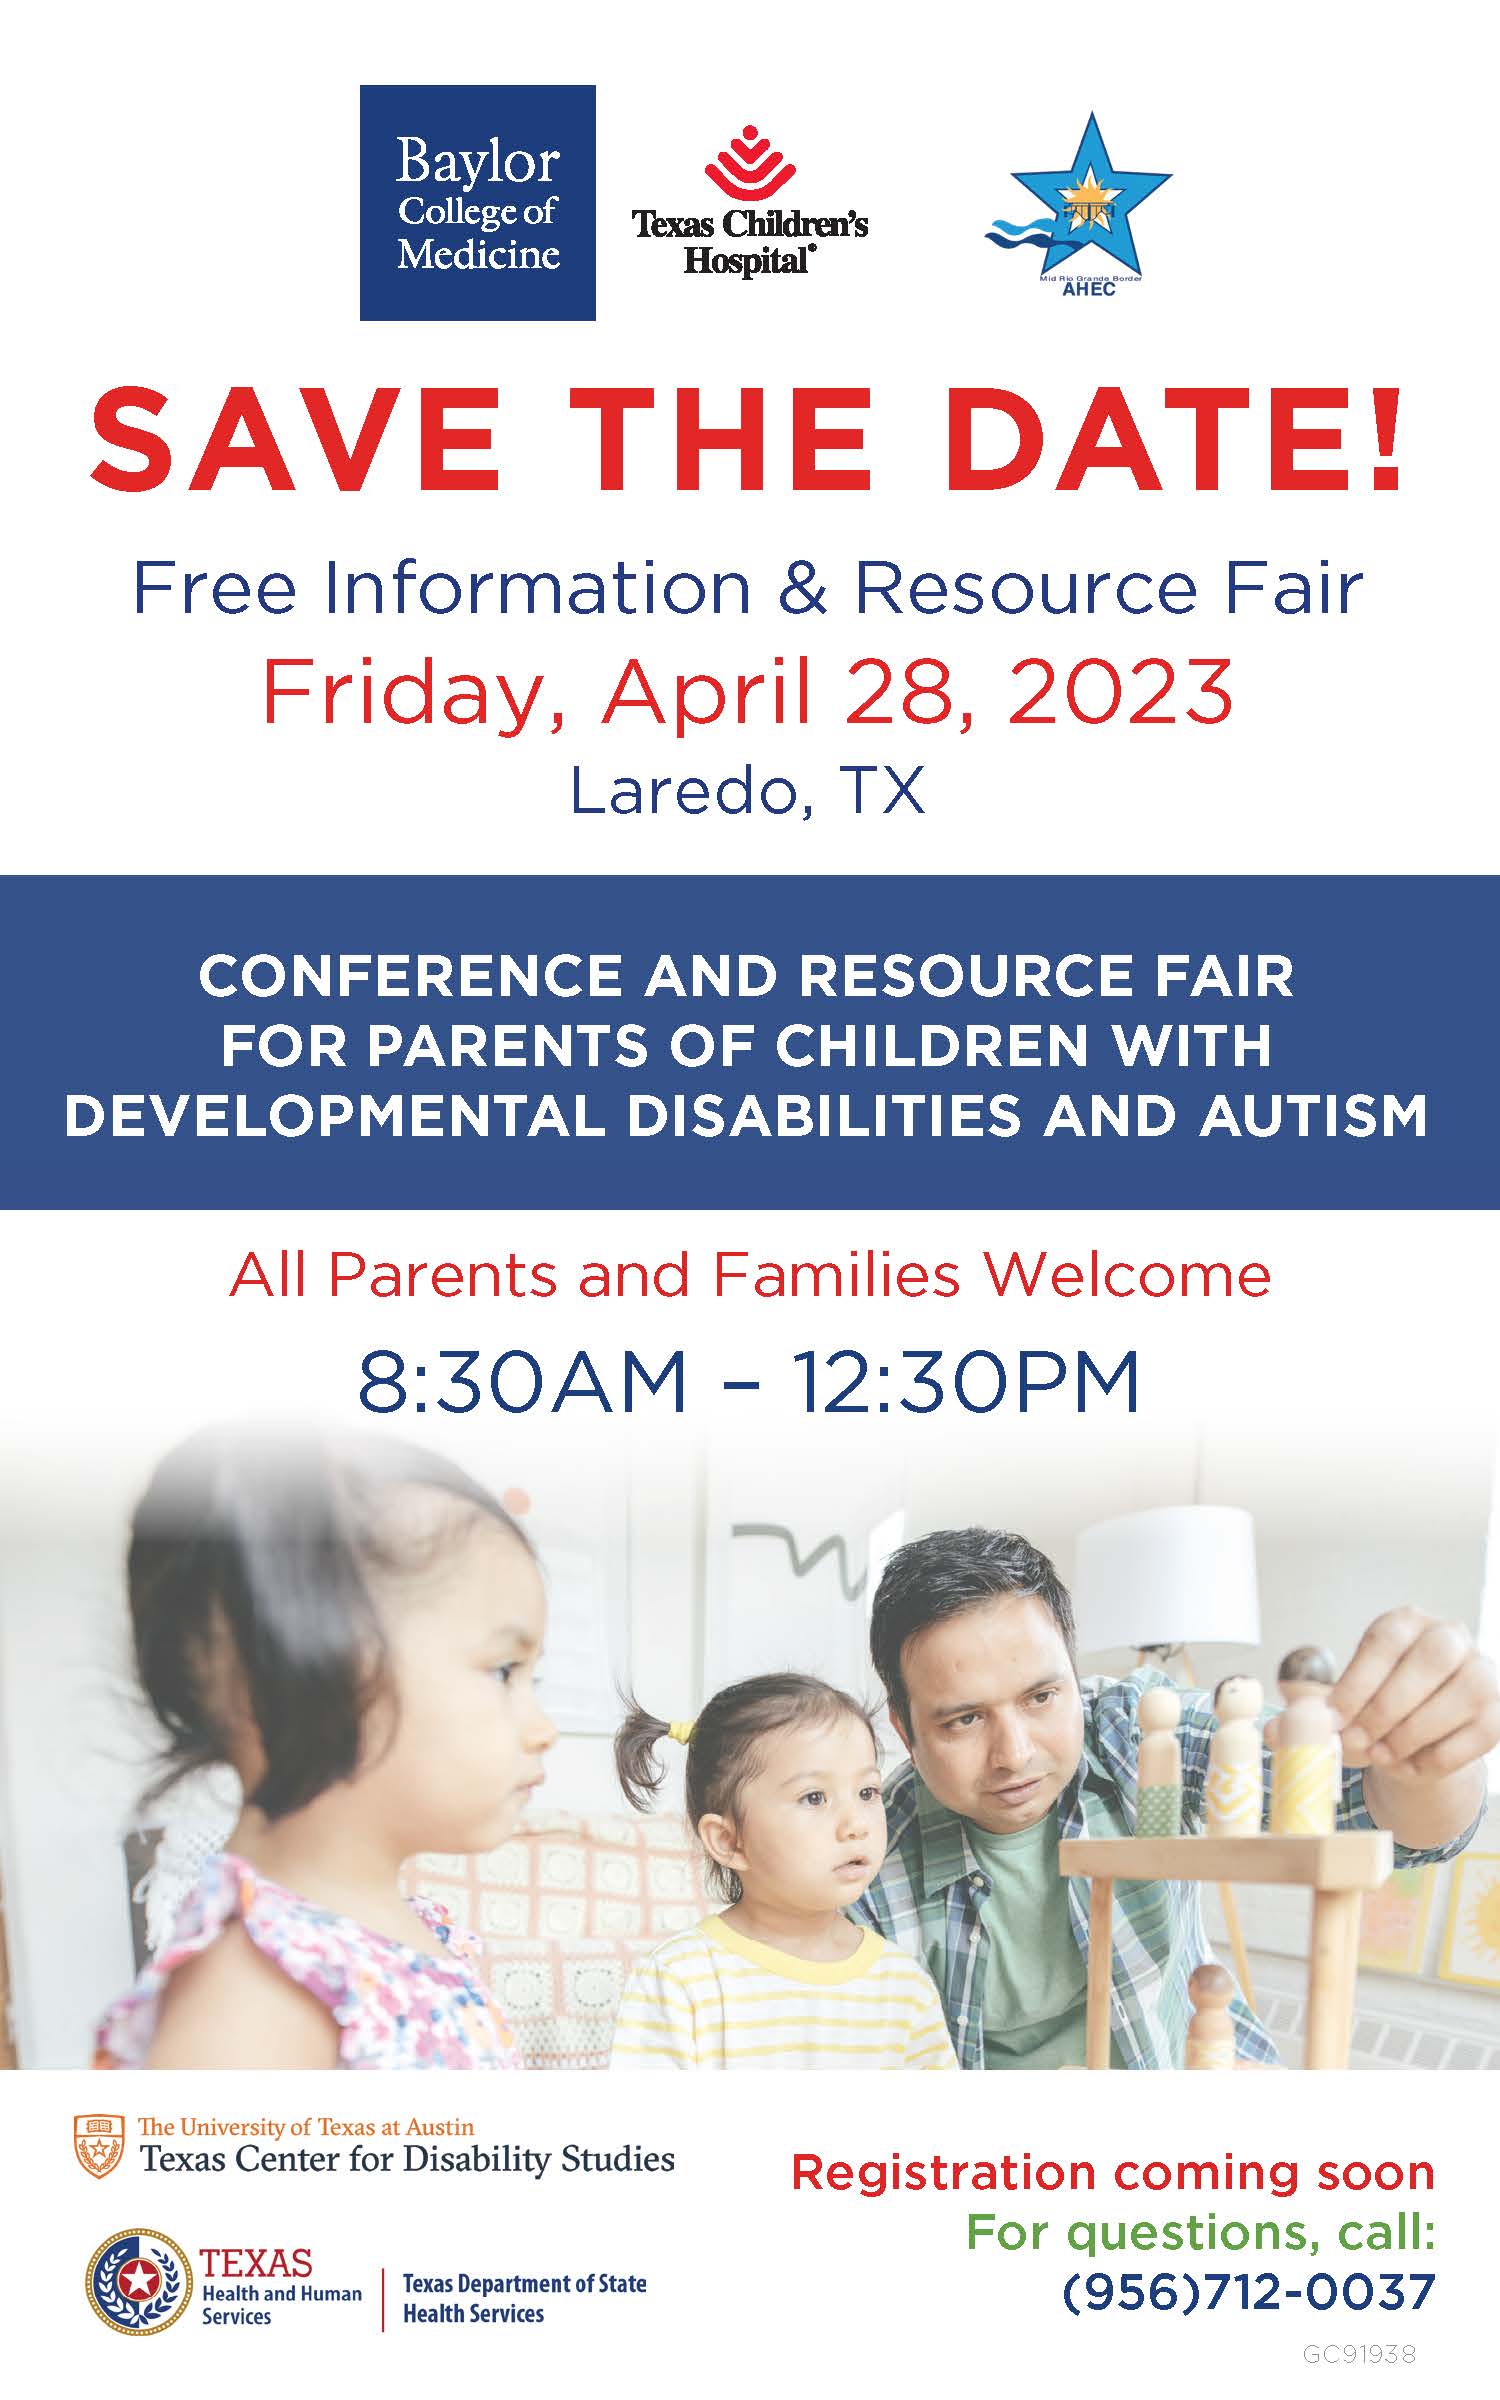 Conference and Resource Fair Flyer to be held in Laredo, TX, on Friday, April 28, 2023.